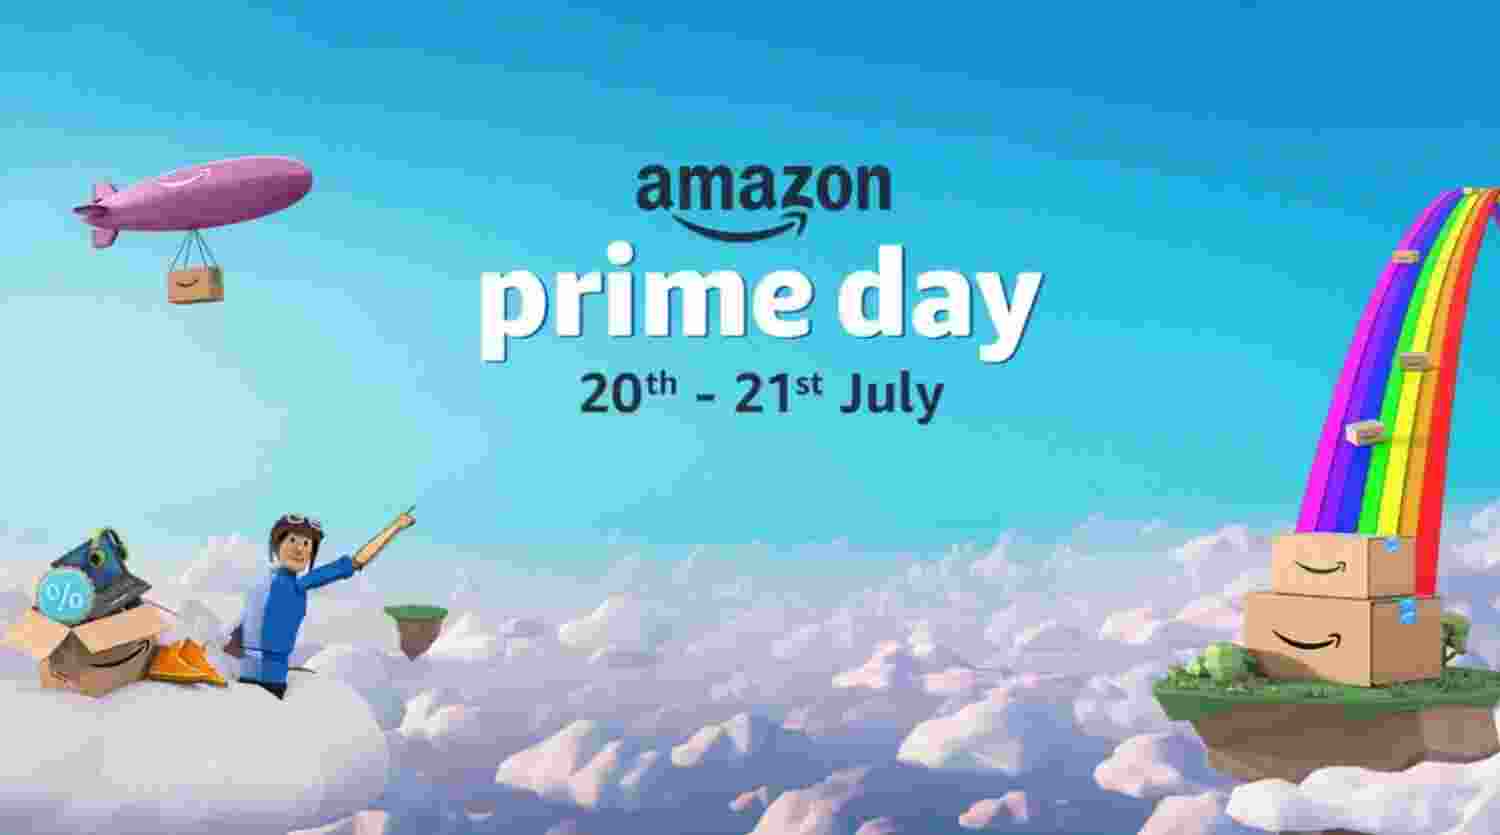 Amazon India's Prime Day sale on July 20-21